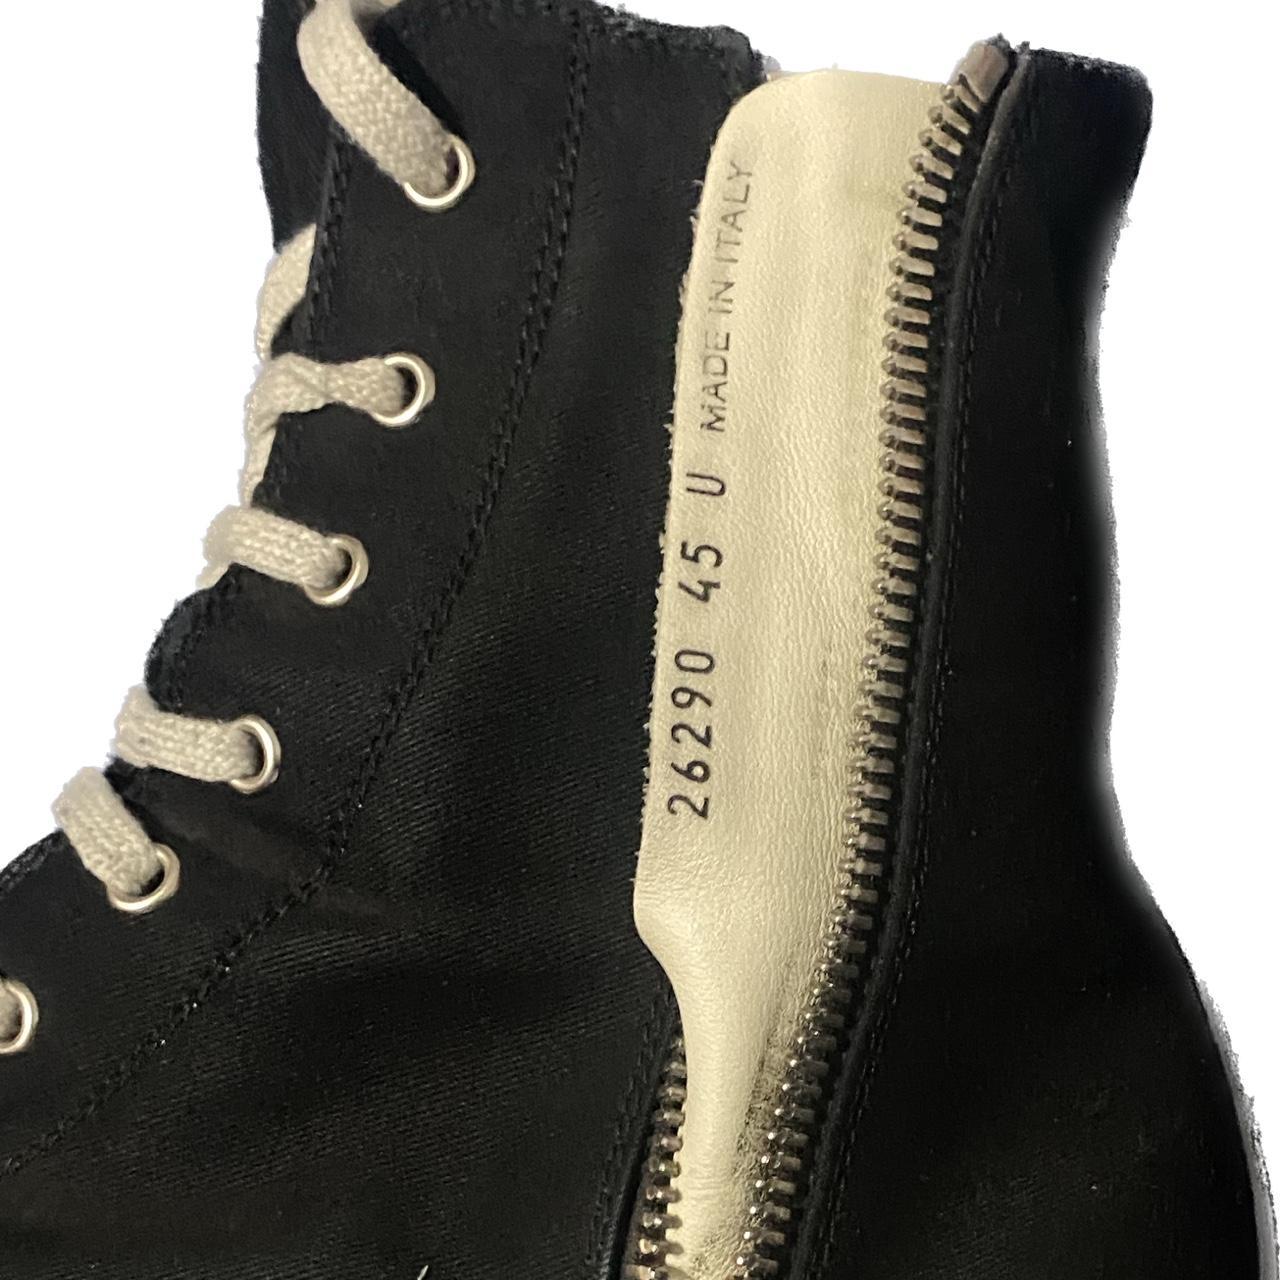 Product Image 4 - distressed rick ramones (send offers)
size